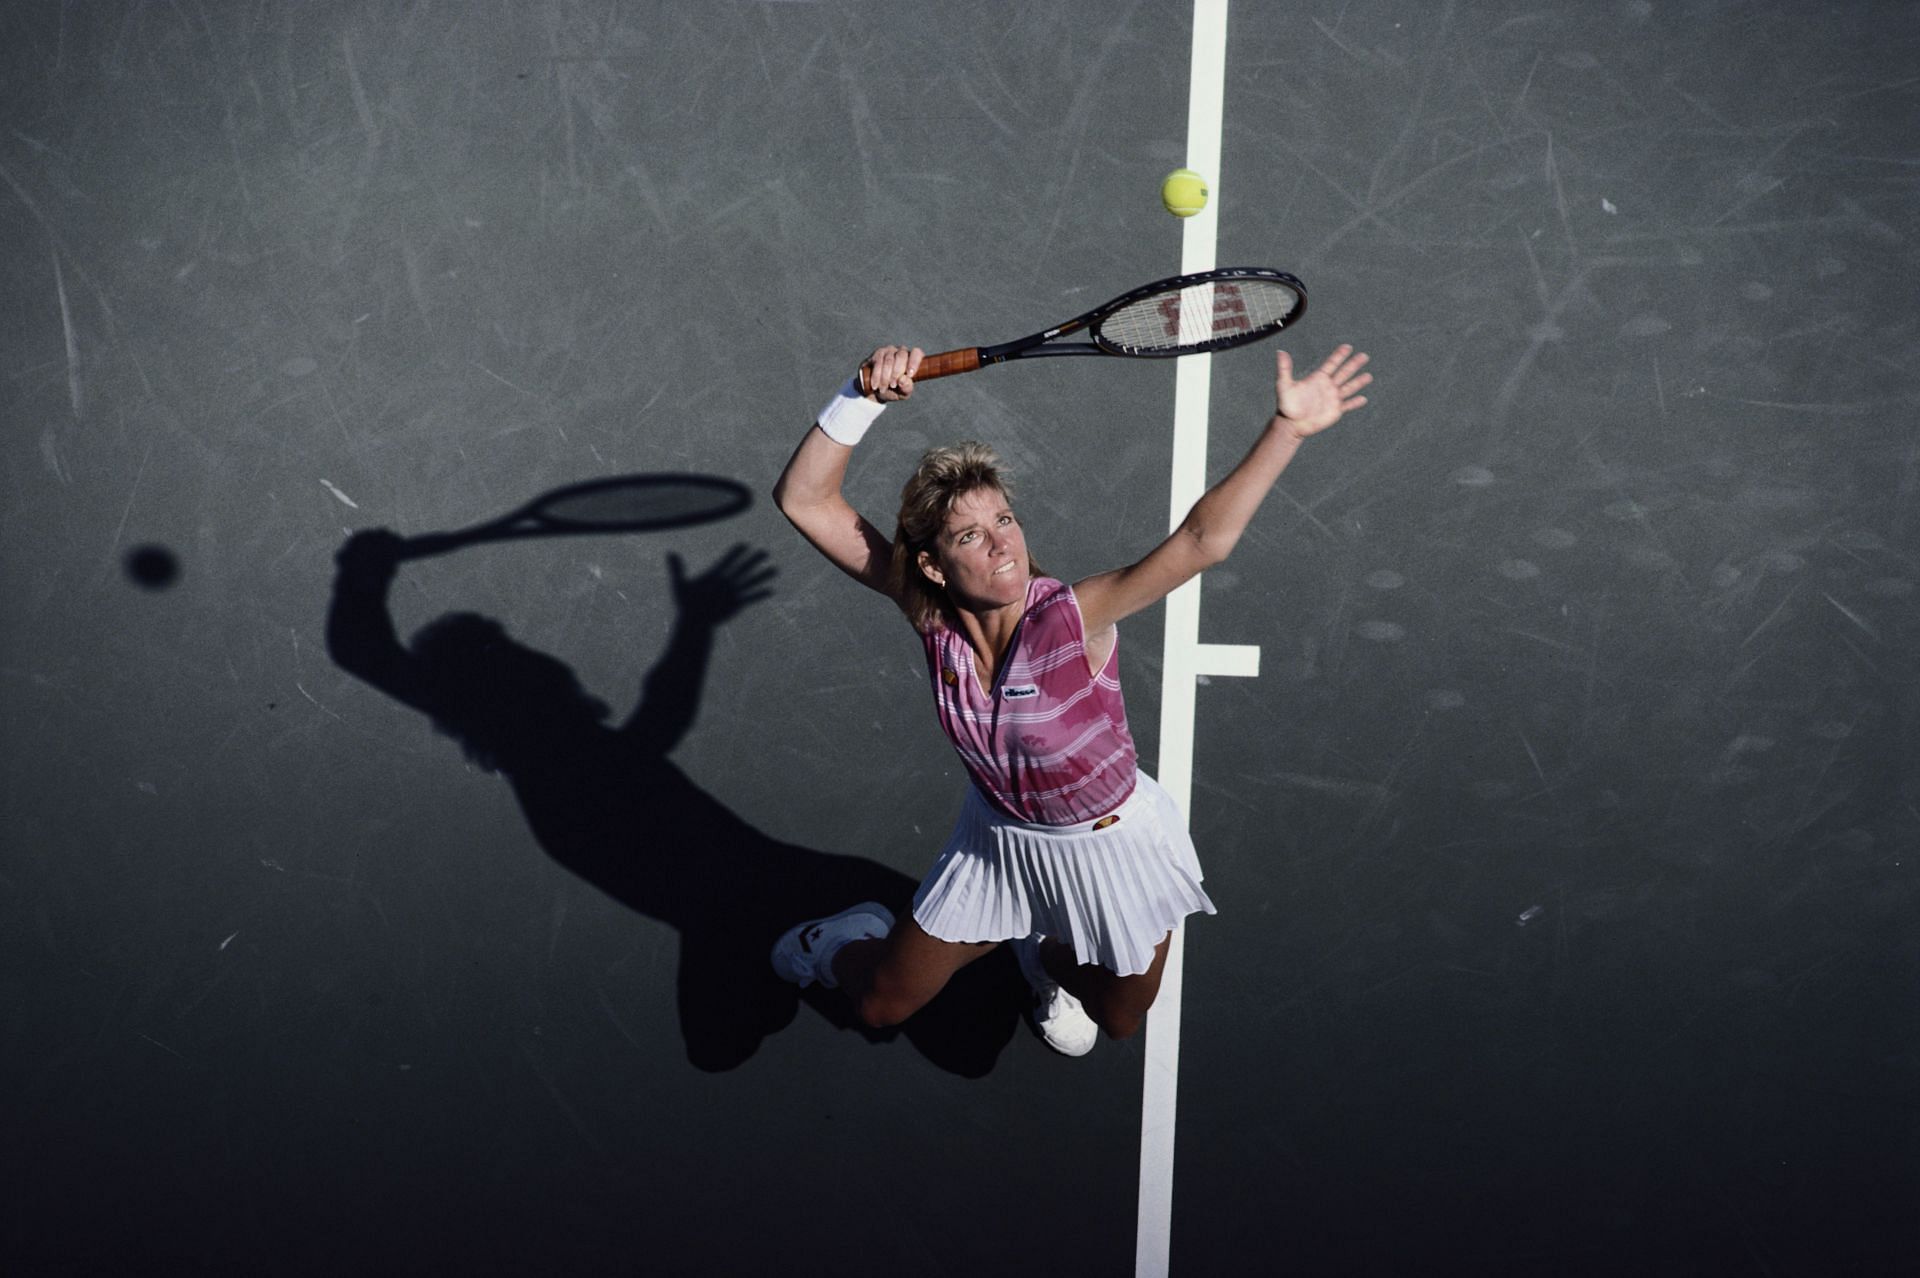 Chris Evert during her playing days